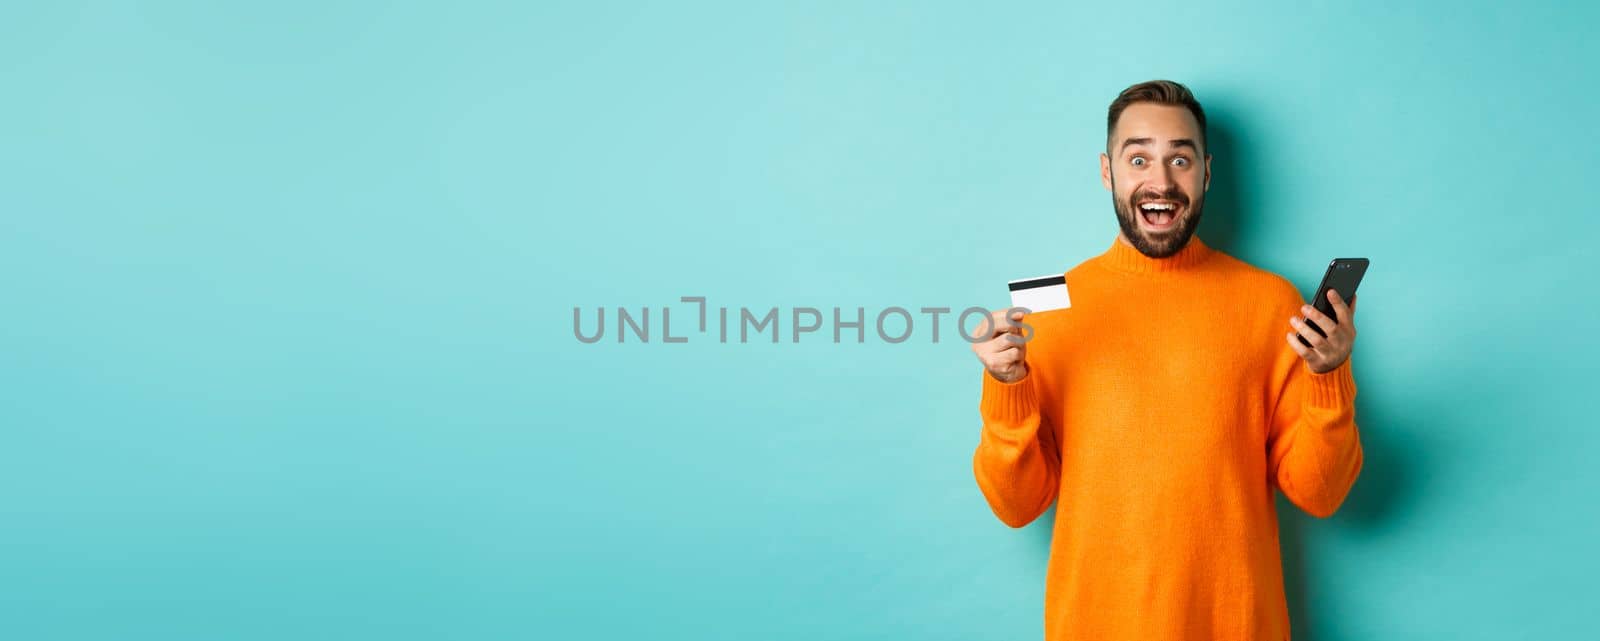 Online shopping. Surprised man holding mobile phone and credit card, paying in internet store, standing over light blue background.